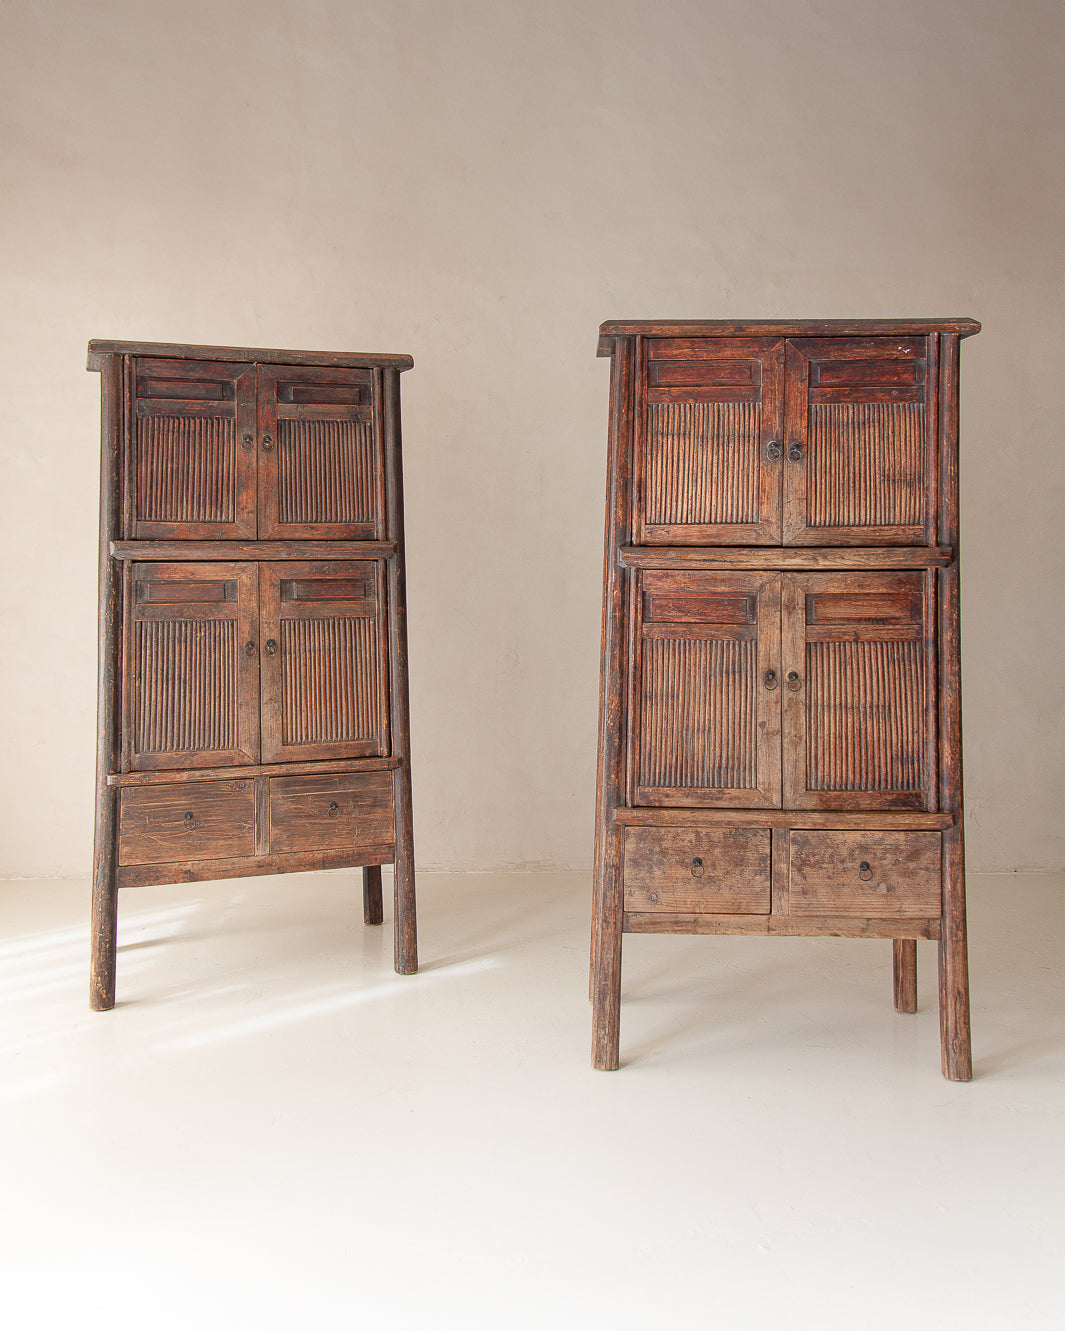 Chinese Cabinet 19th century